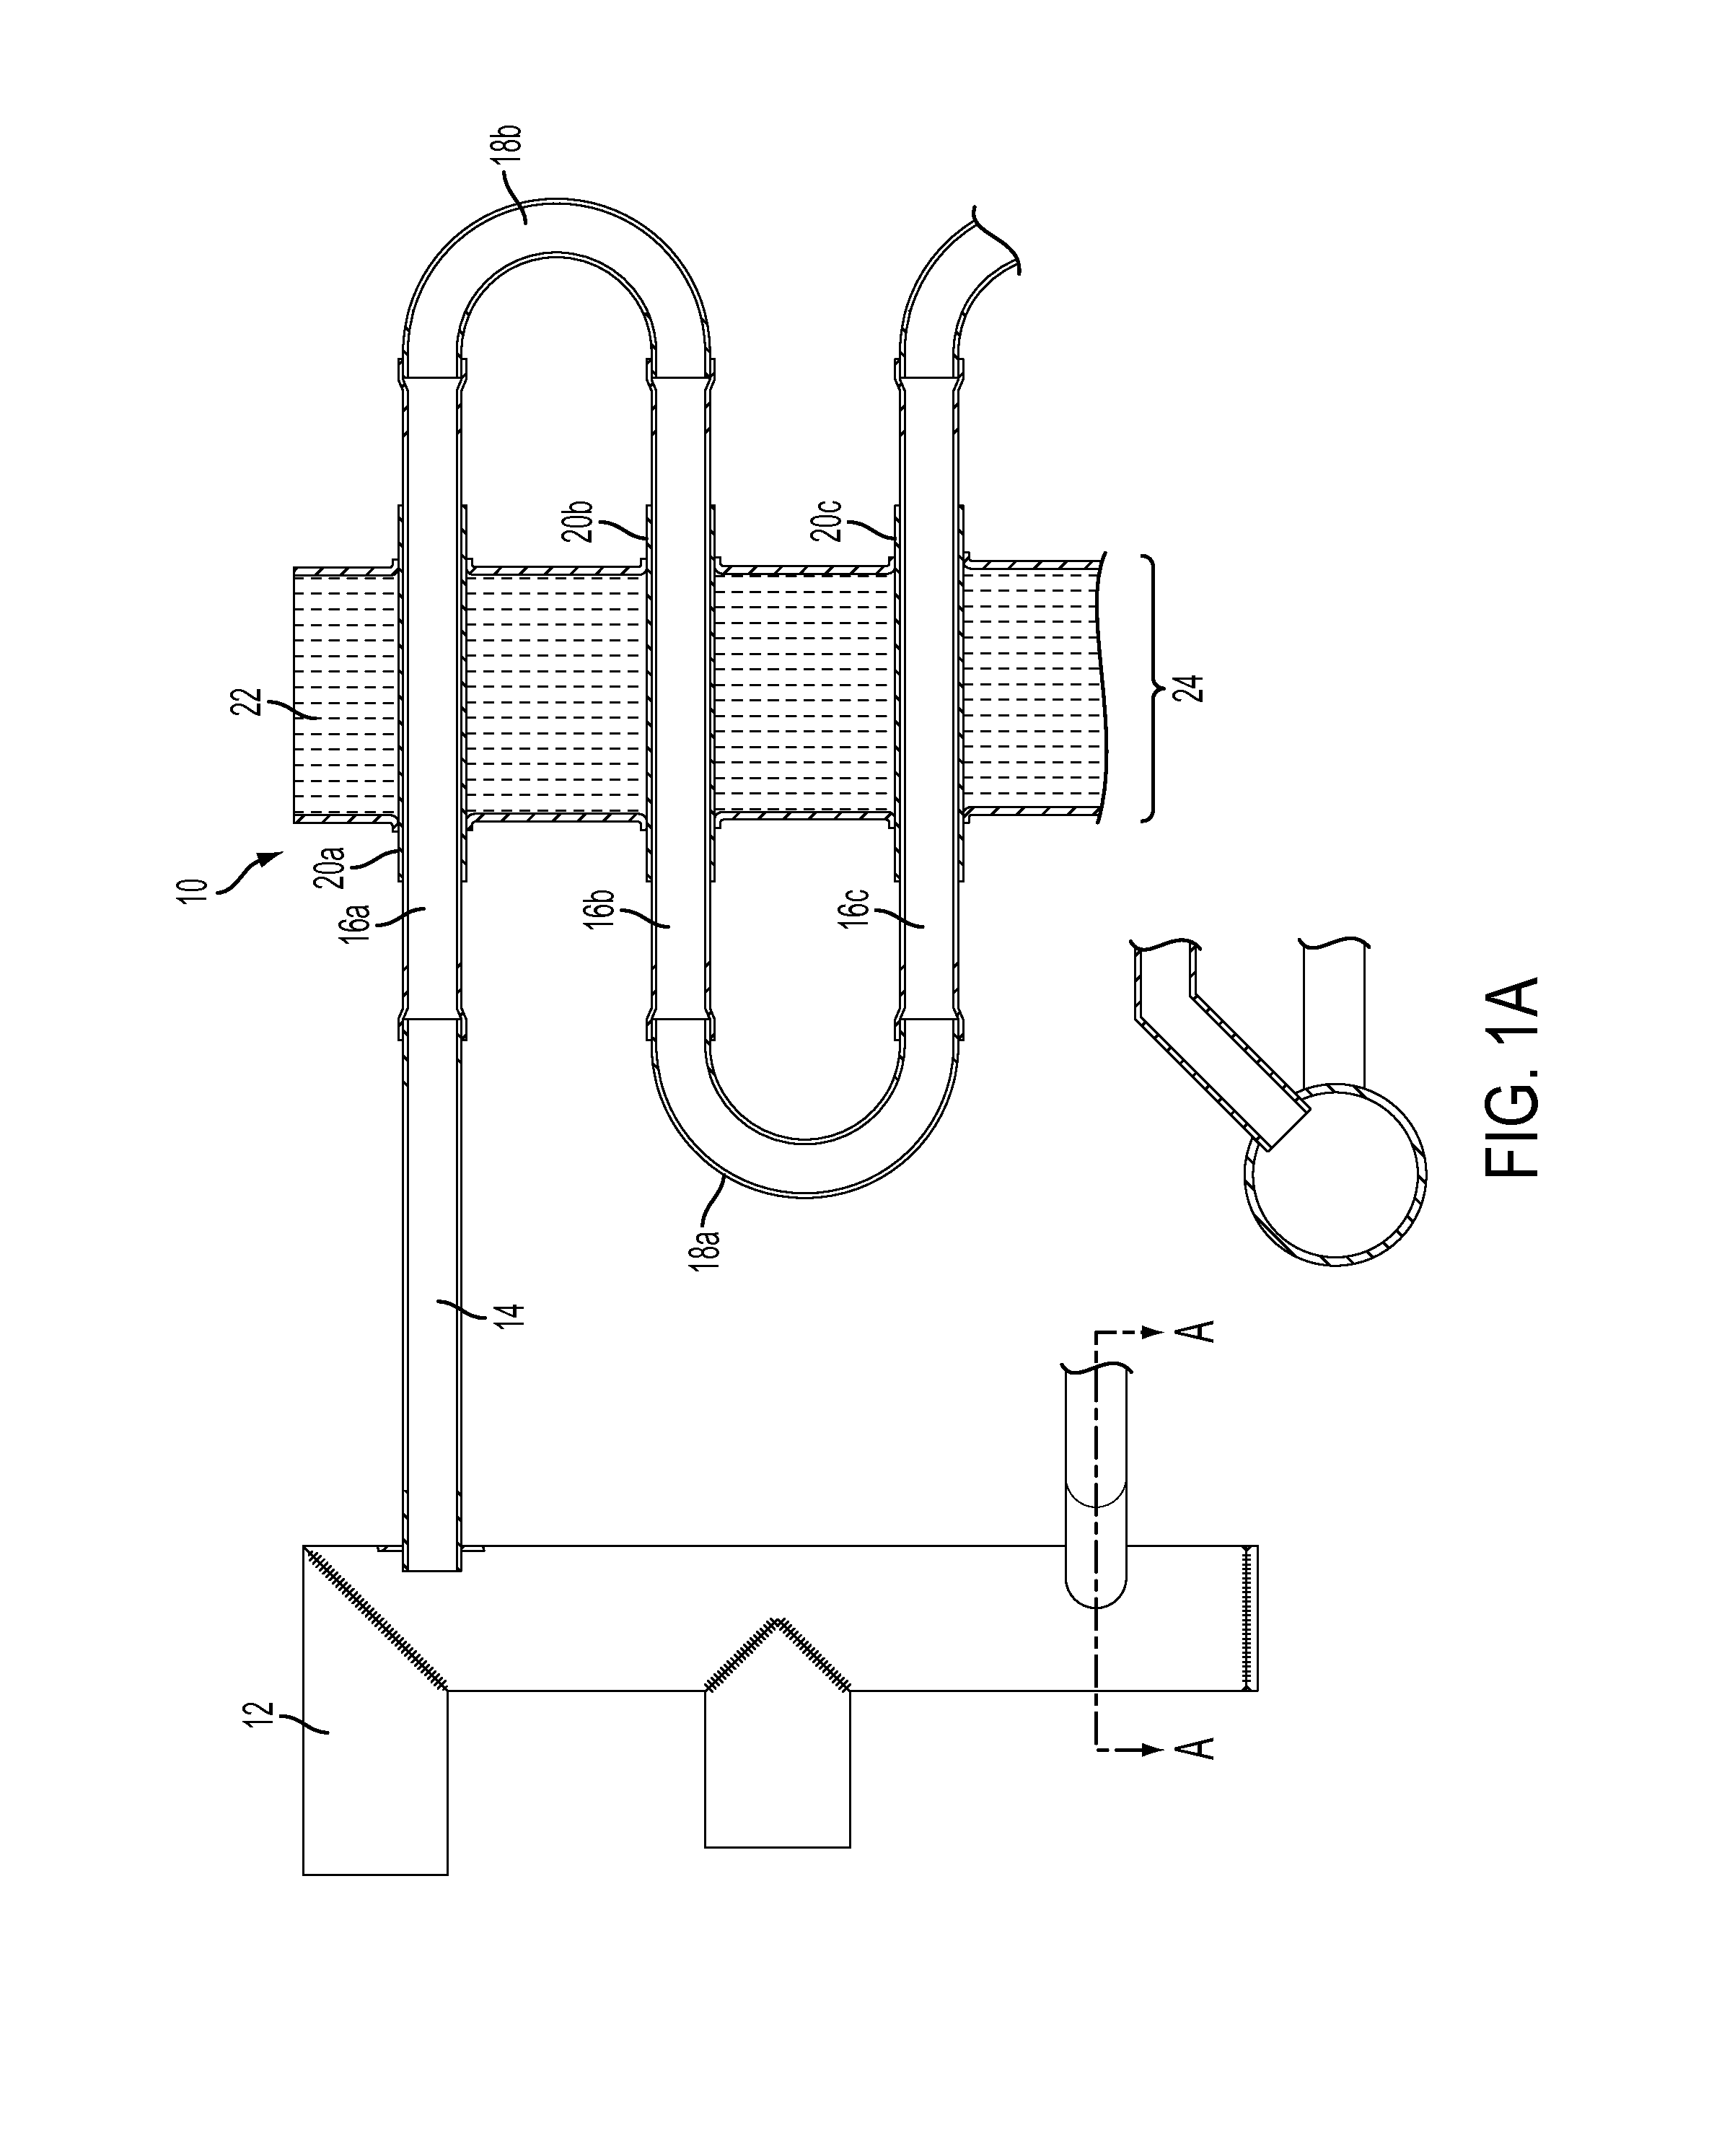 Double-Walled Dry Heat Exchanger Coil With Single-Walled Return Bends